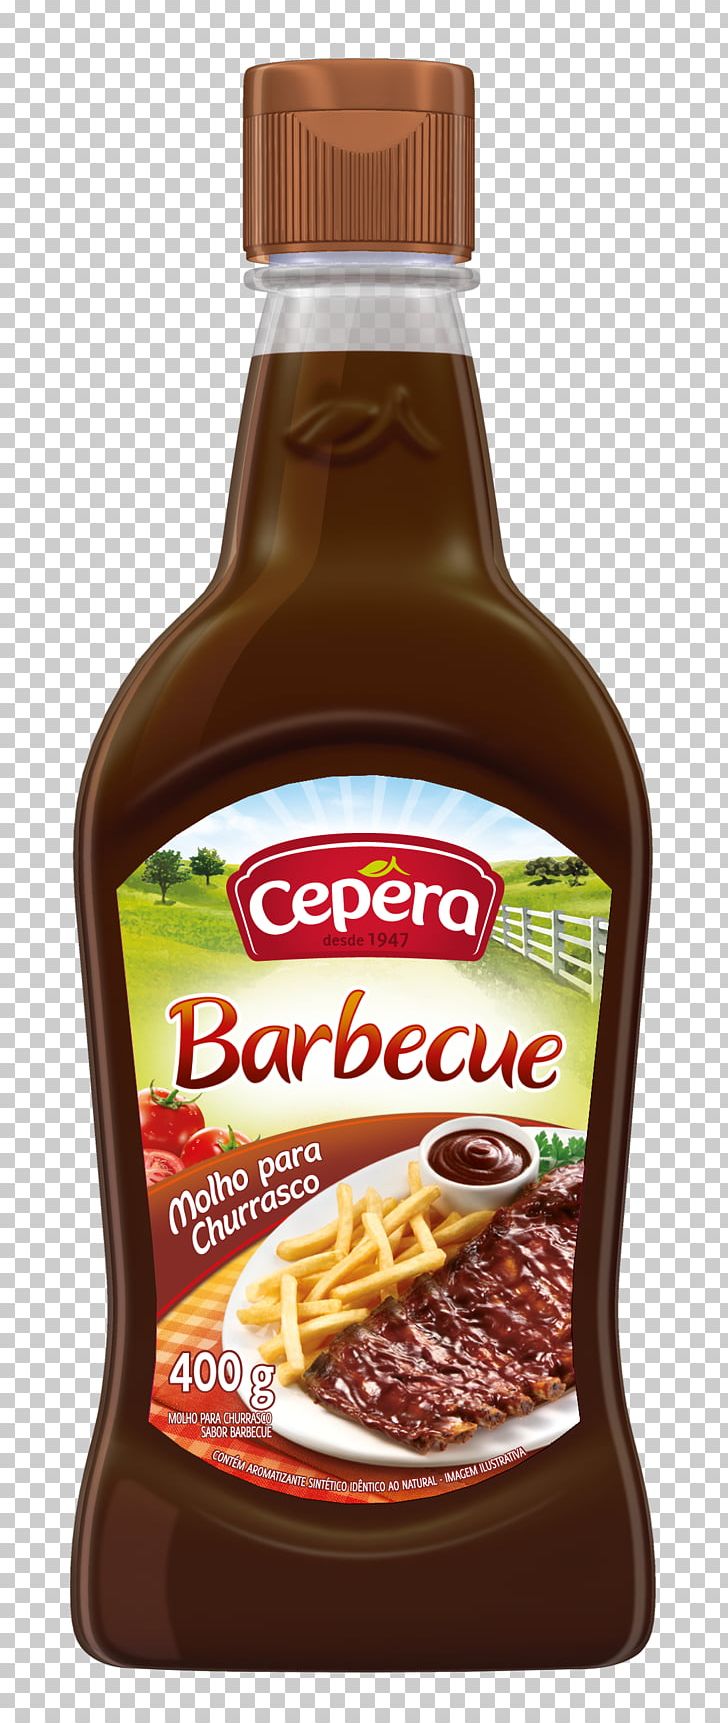 Ketchup Barbecue Sauce Churrasco PNG, Clipart, Barbecue, Barbecue Sauce, Black Pepper, Cajeta, Chili Pepper Free PNG Download